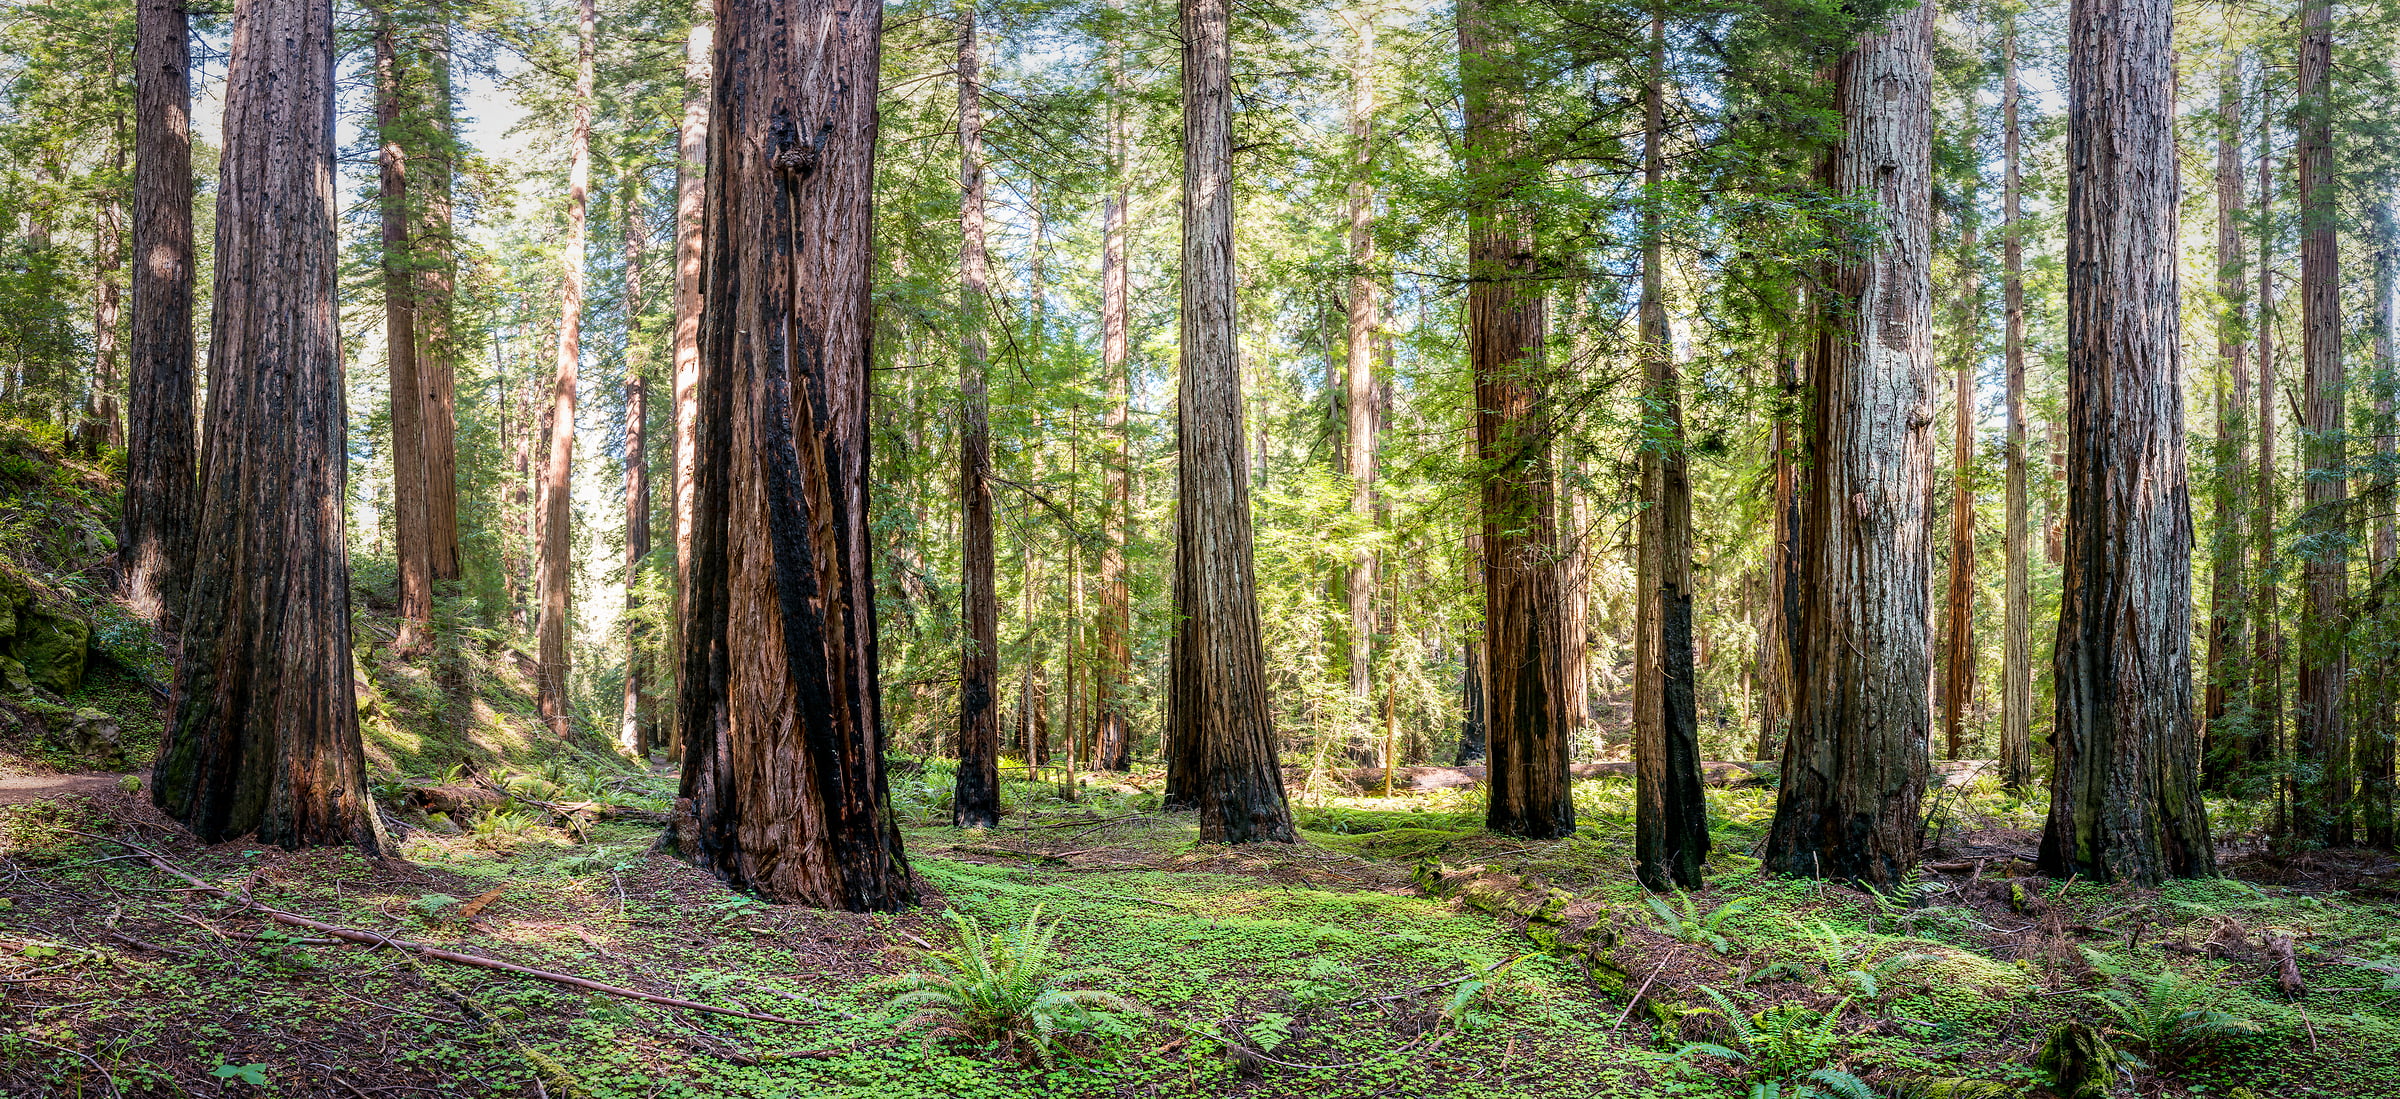 632 megapixels! A very high resolution, large-format VAST photo of a redwood forest; fine art nature photo created by Justin Katz in Montgomery Woods State Reserve, California